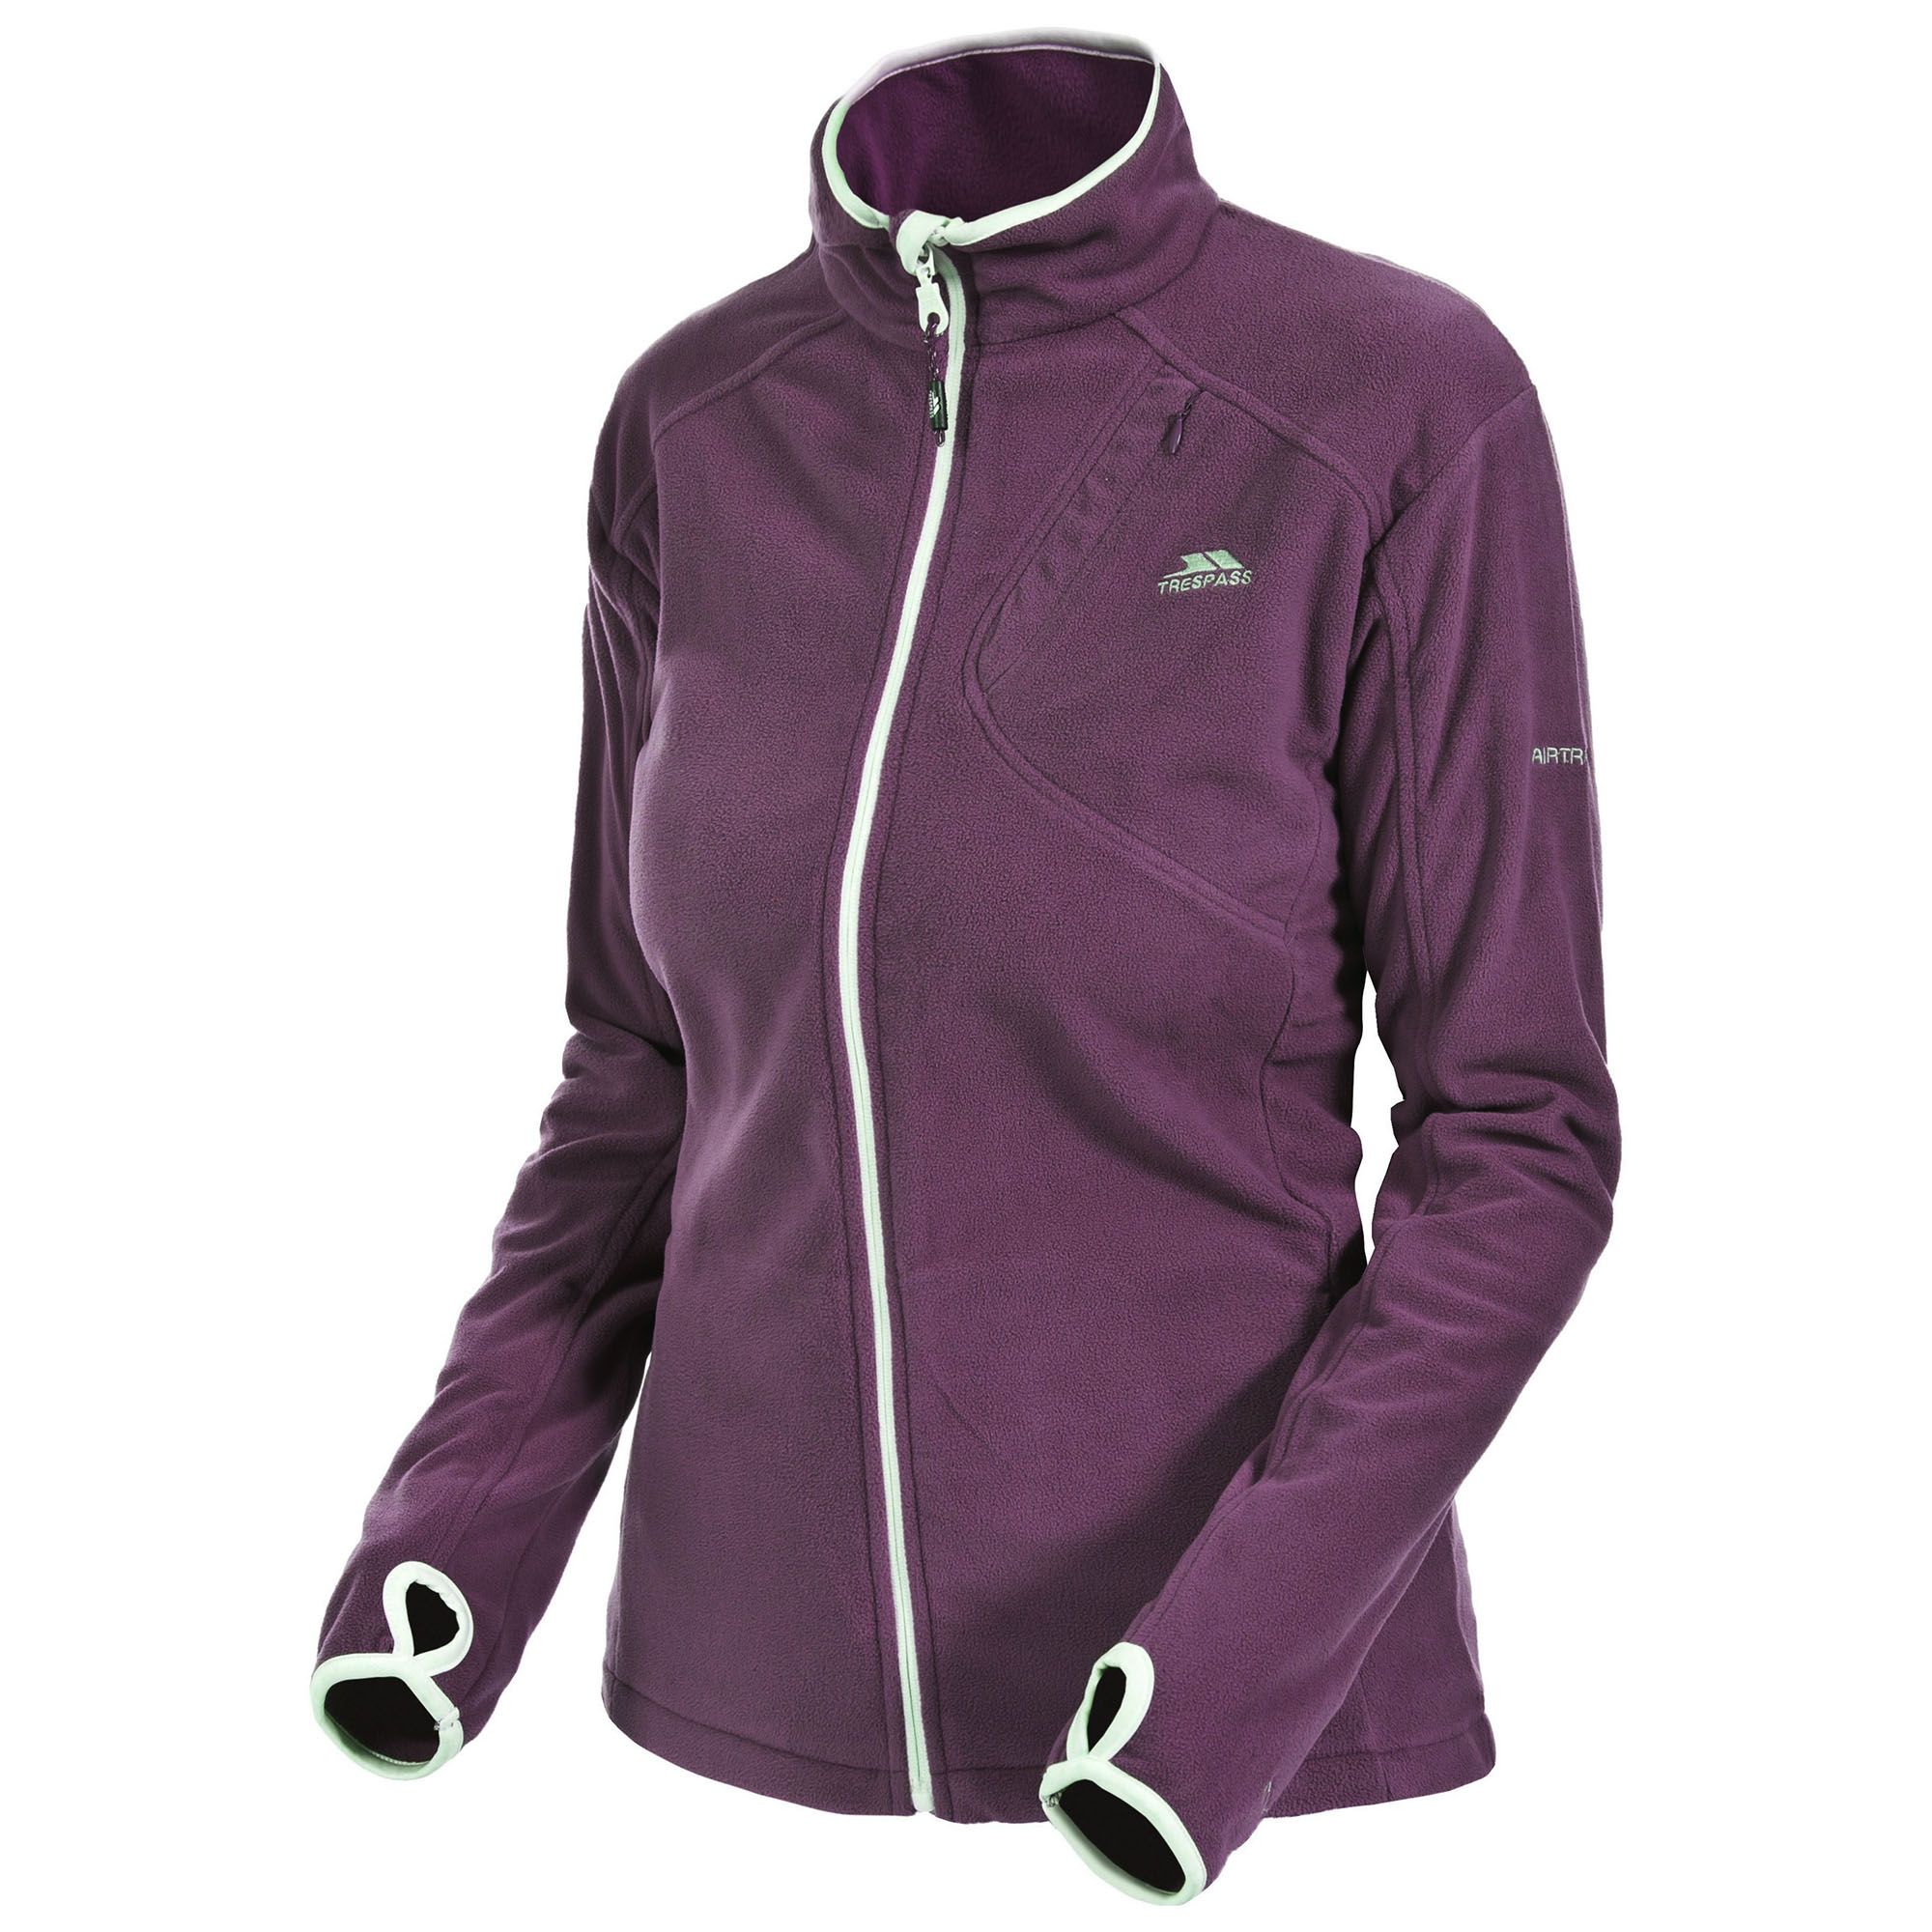 Contrasting low profile centre zip. 2 lower zipped pockets. 1 zipped chest pocket. Finished with contrast binding. Thumb loops. 100% Polyester. Trespass Womens Chest Sizing (approx): XS/8 - 32in/81cm, S/10 - 34in/86cm, M/12 - 36in/91.4cm, L/14 - 38in/96.5cm, XL/16 - 40in/101.5cm, XXL/18 - 42in/106.5cm.